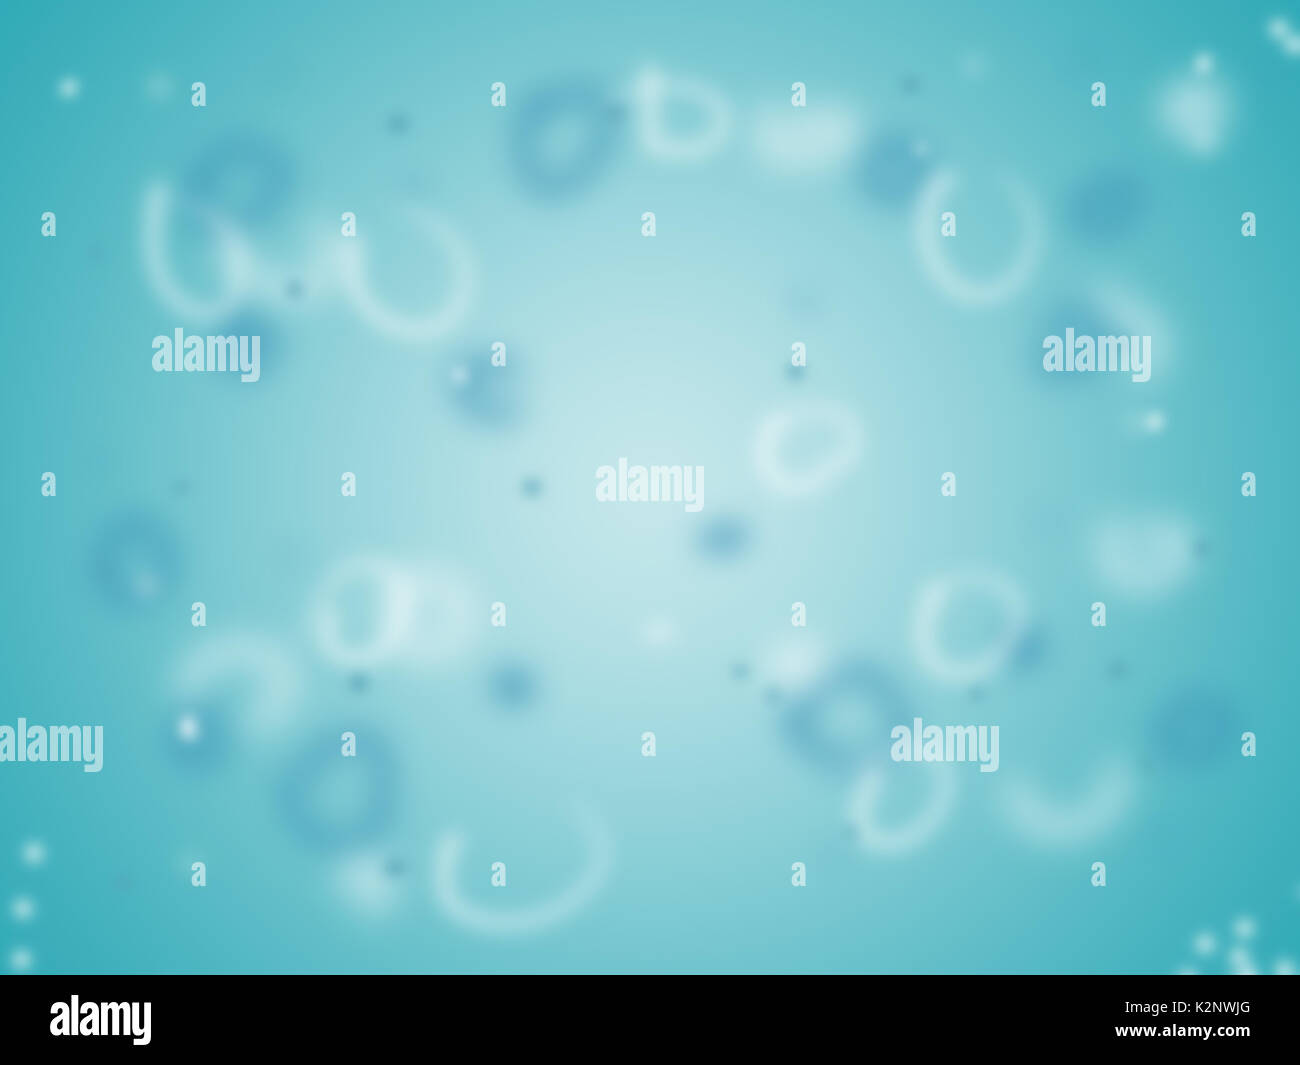 Simple blue liquid mucous background with particles. Abstract medical illustration Stock Photo